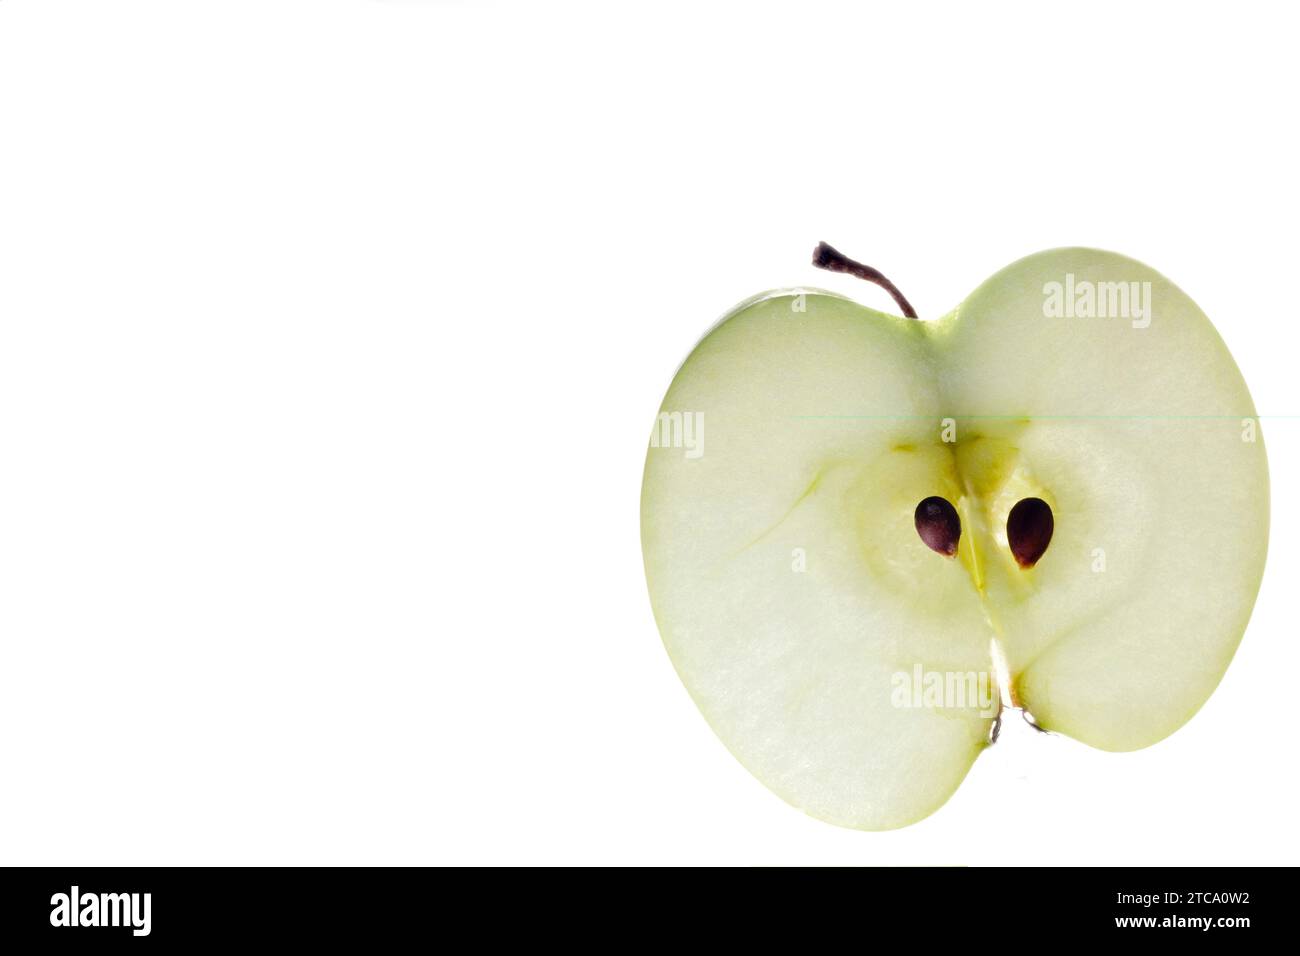 Still life of a sliced apple on white background Stock Photo